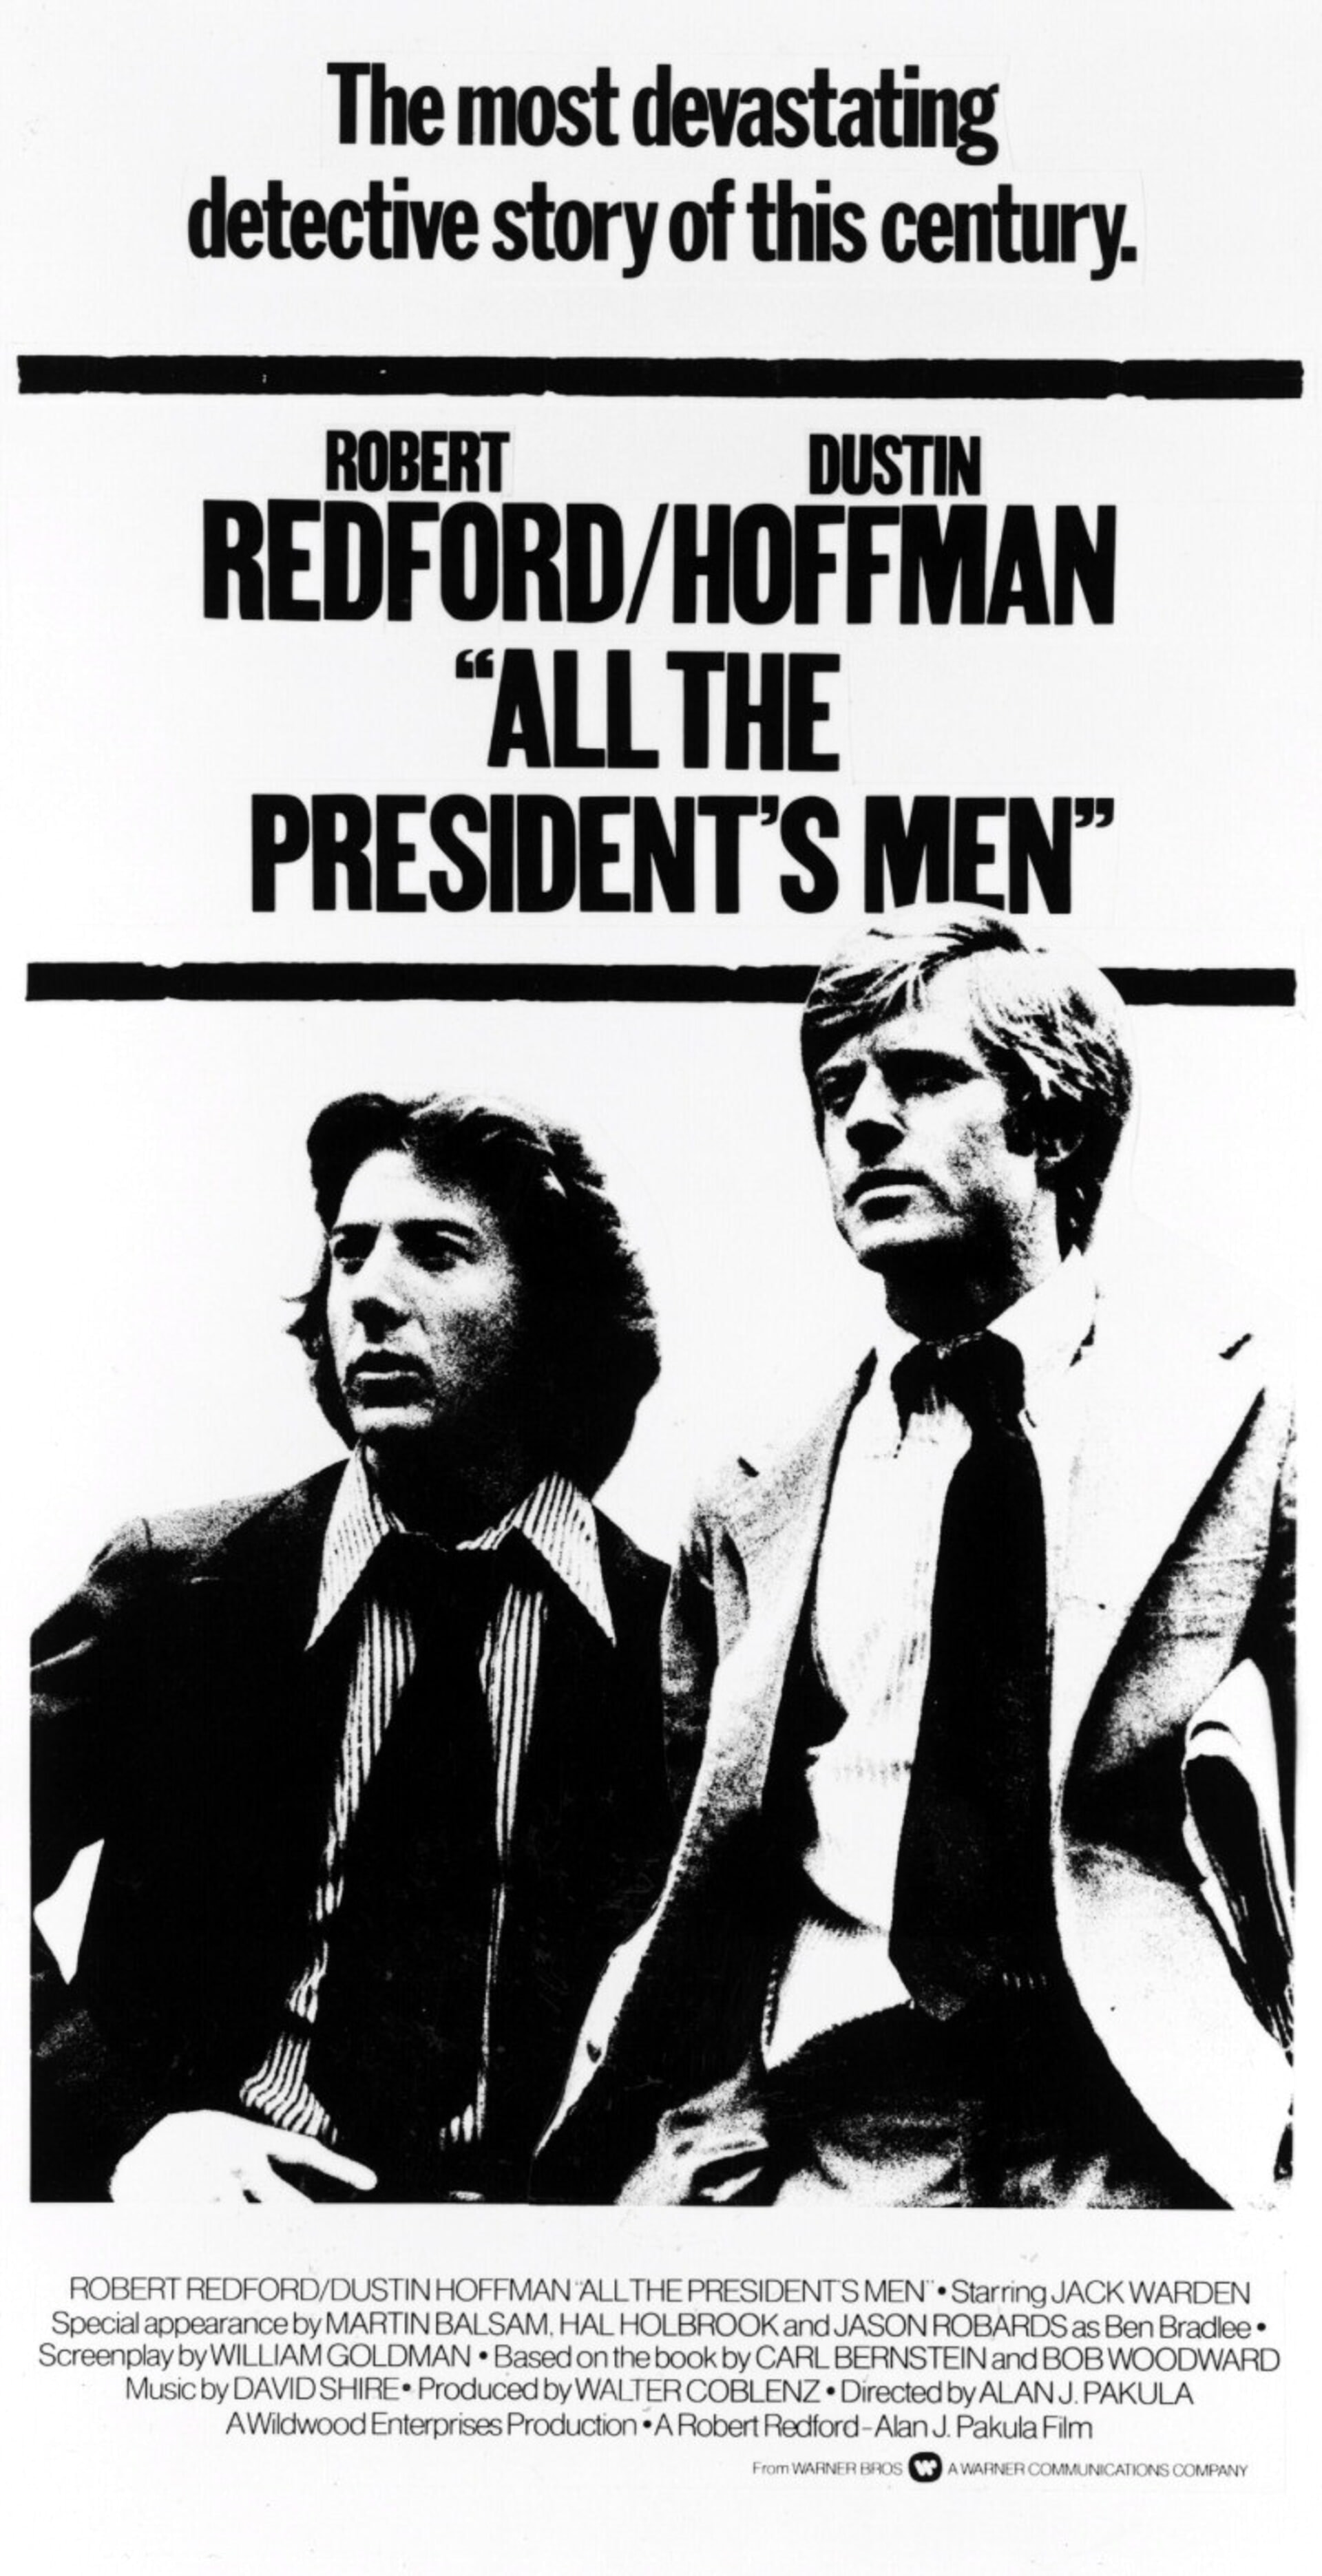 WarnerBros.com | All the President's Men | Movies